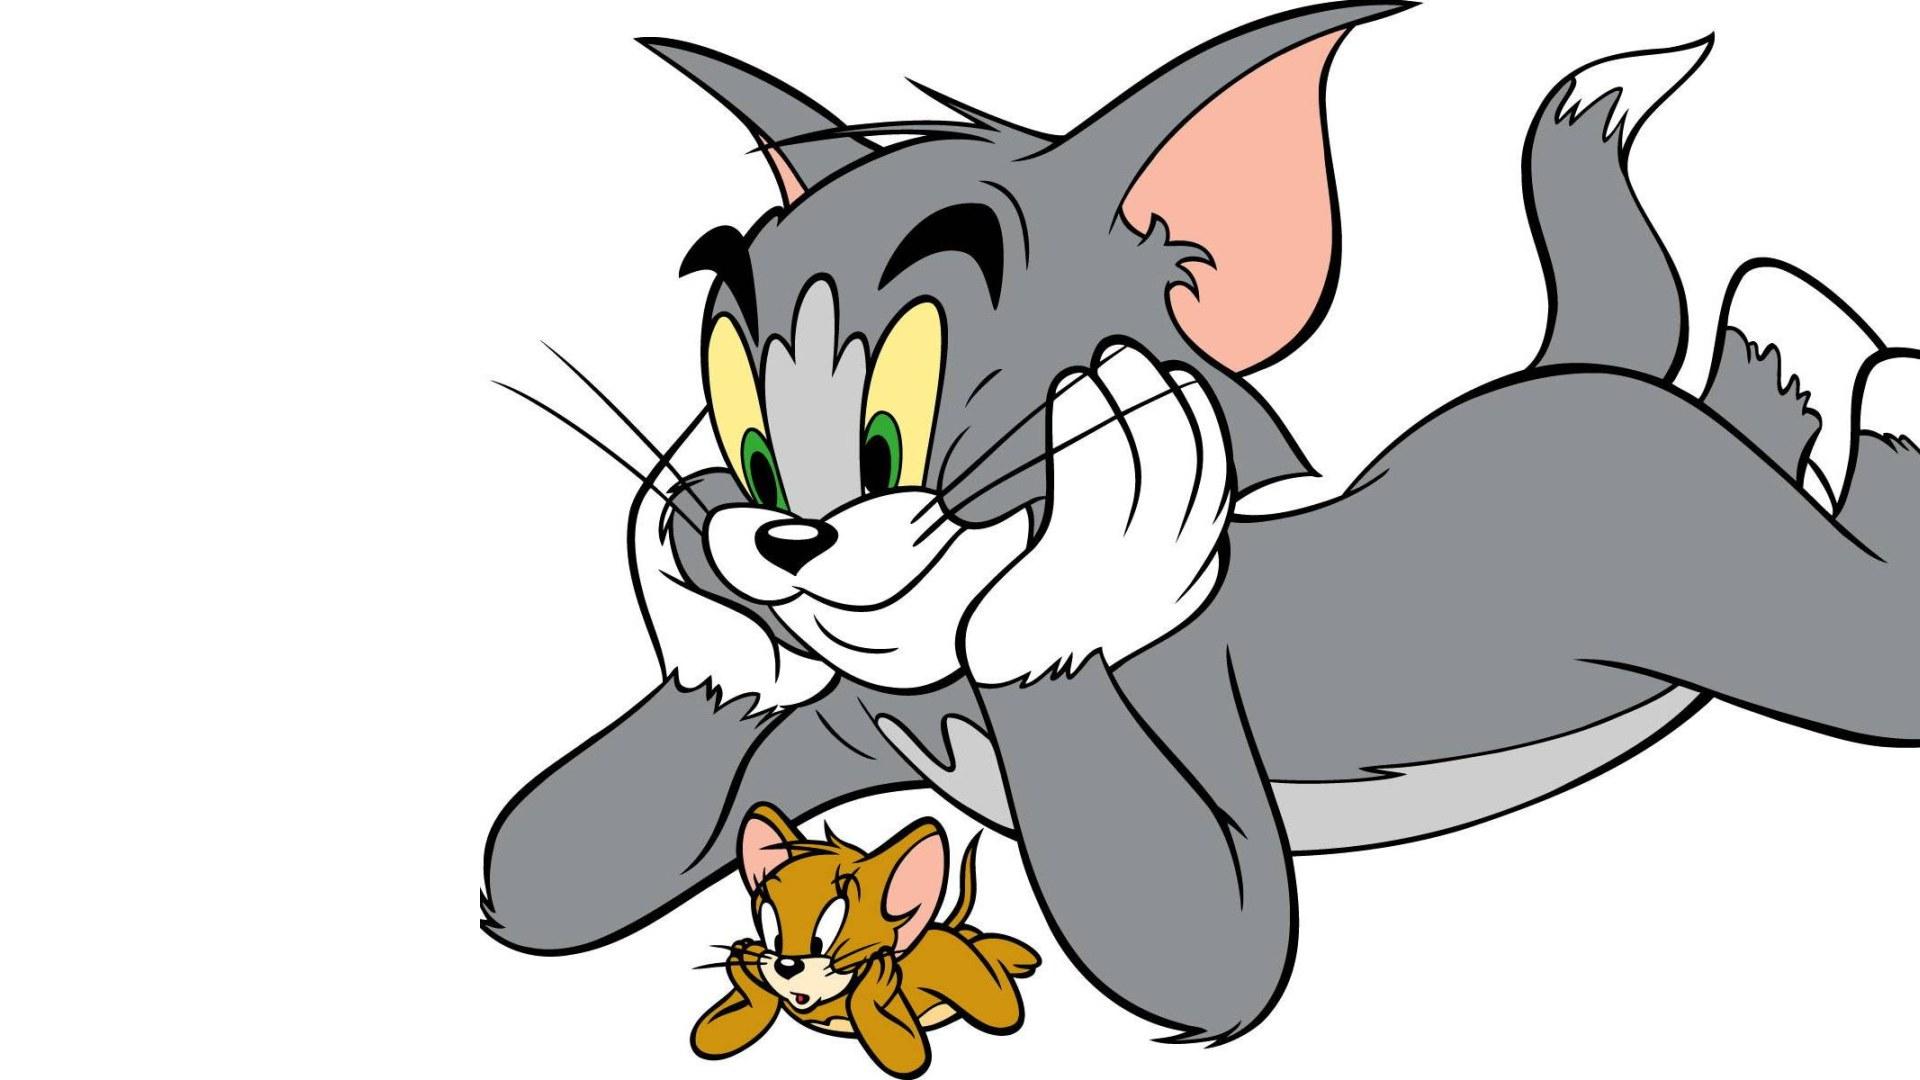 1080p Wallpaper  Tom And Jerry